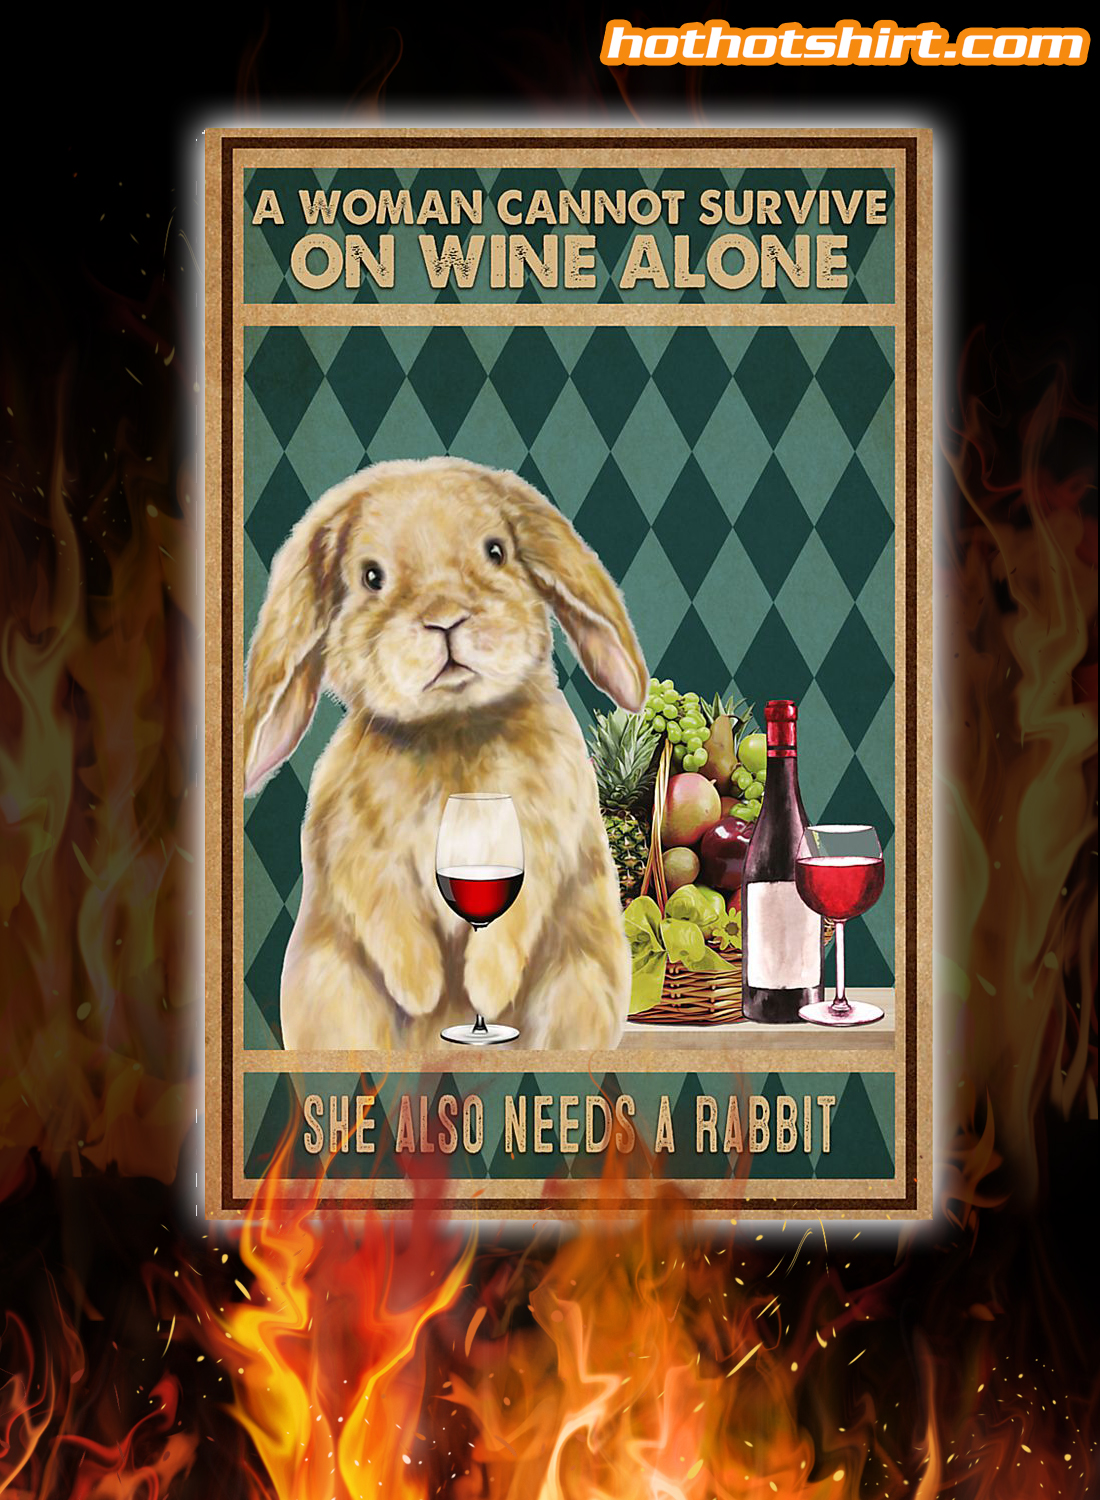 A woman cannot survive on wine alone she also needs a rabit poster